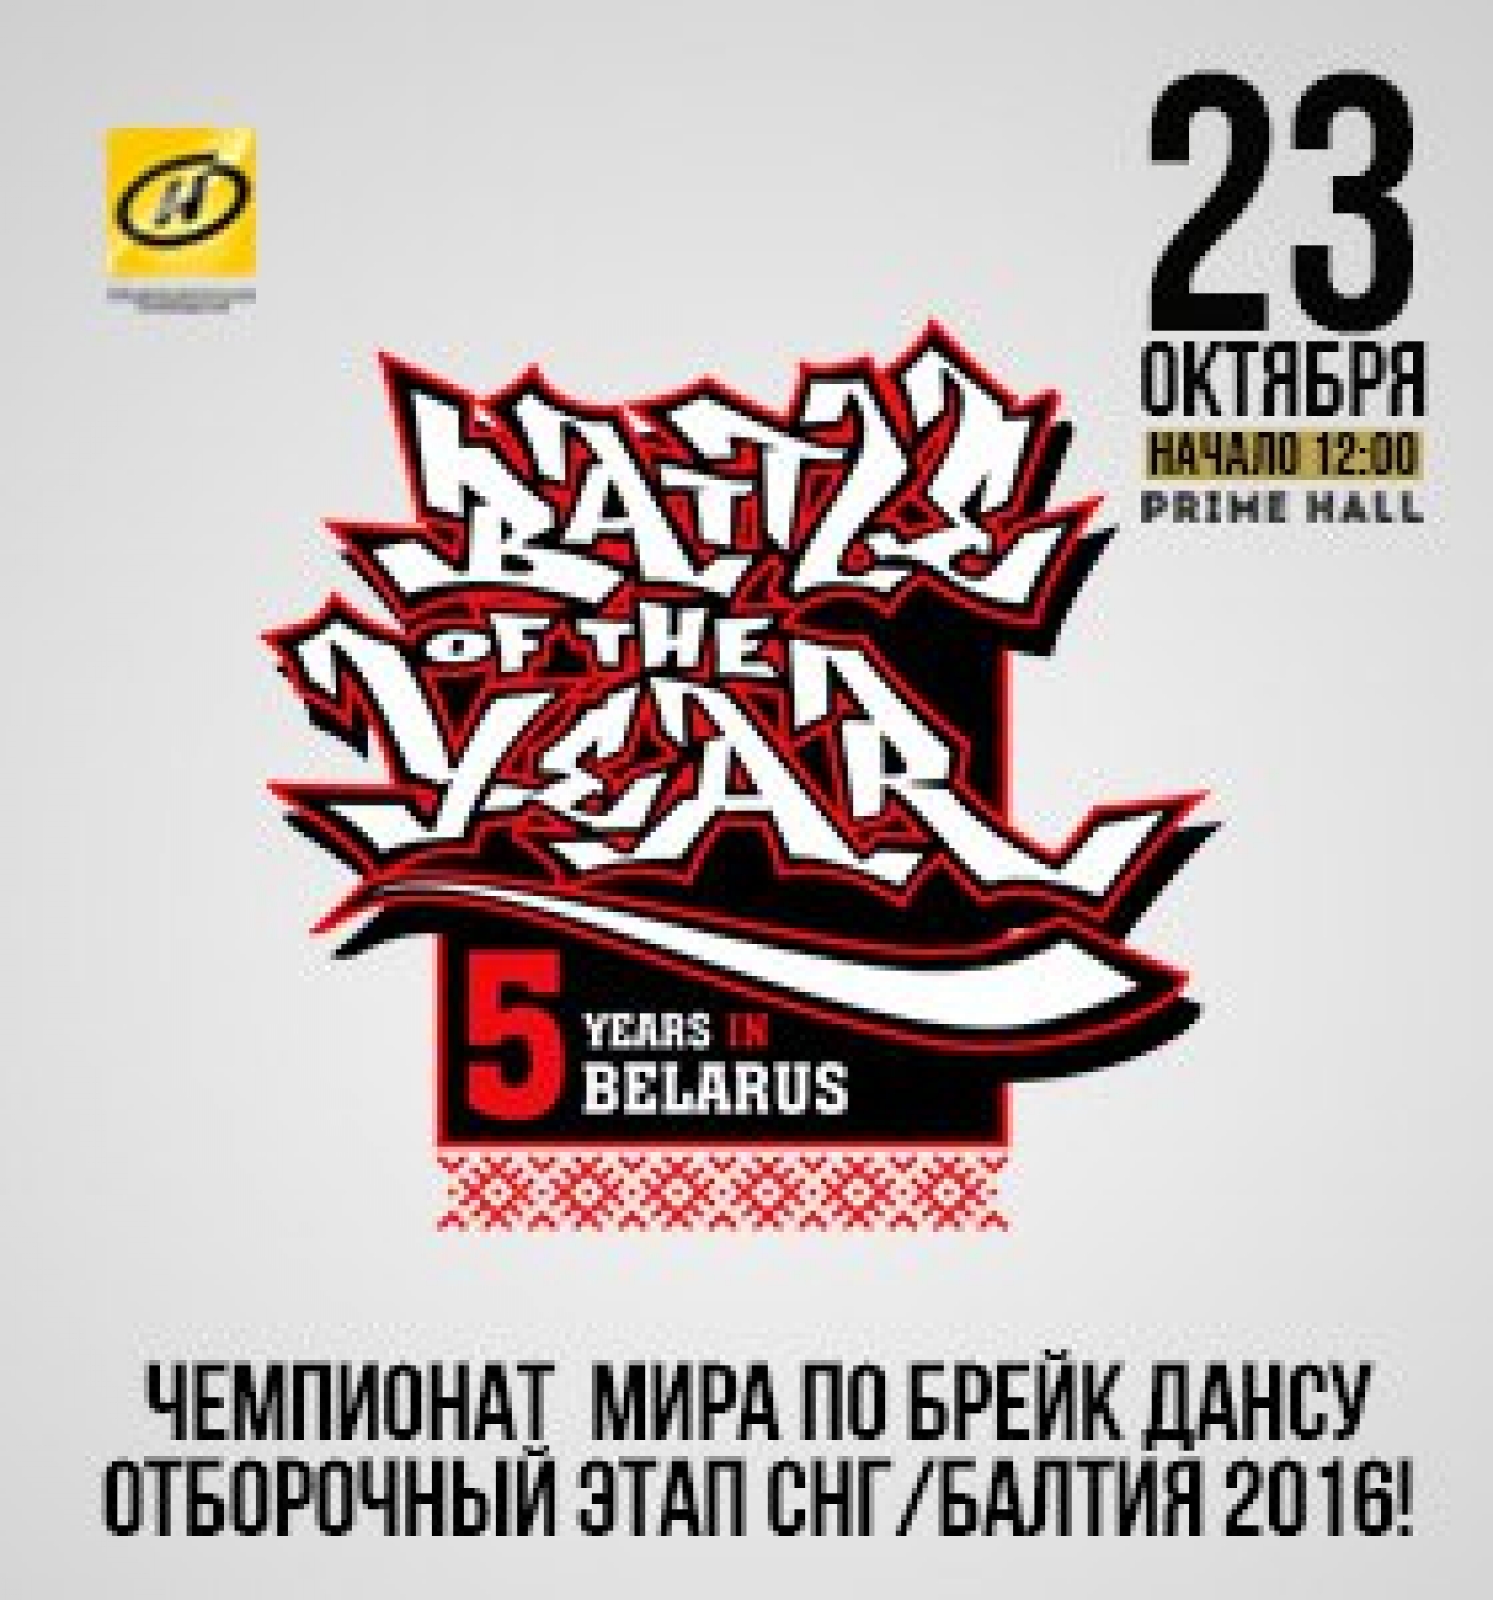 BATTLE OF THE YEAR СНГ / БАЛТИКА 2016 poster